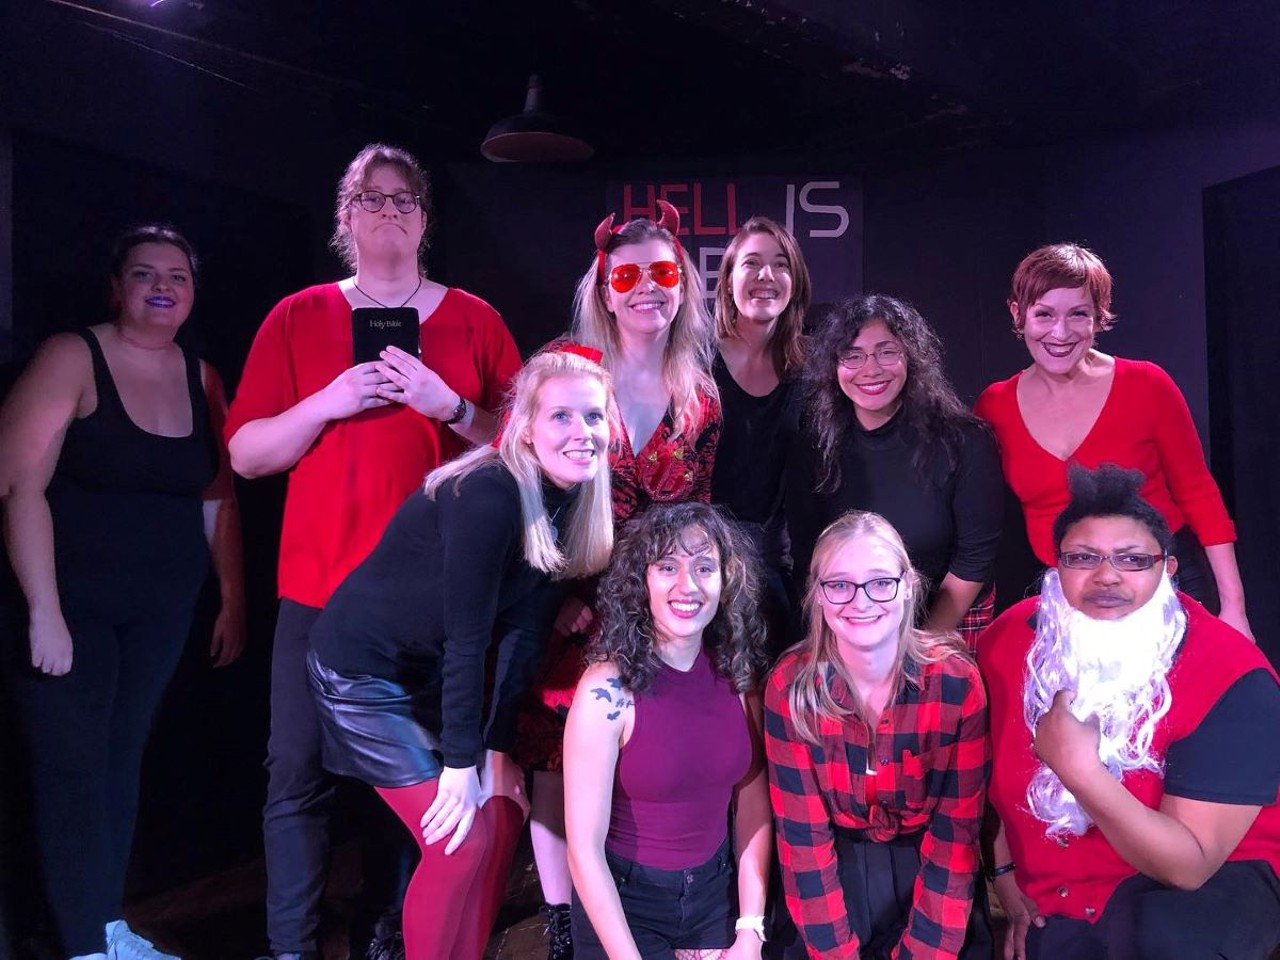 Elfed Up at Clifton Comedy Theatre
When: Dec. 15 & 16 from 8-10 p.m.
Where: Clifton Comedy Theatre, Clifton
What: Live comedy show
Who: Alphas Comedy 
Why: Sketch, improv and stand-up comedy written by the women of Alphas.